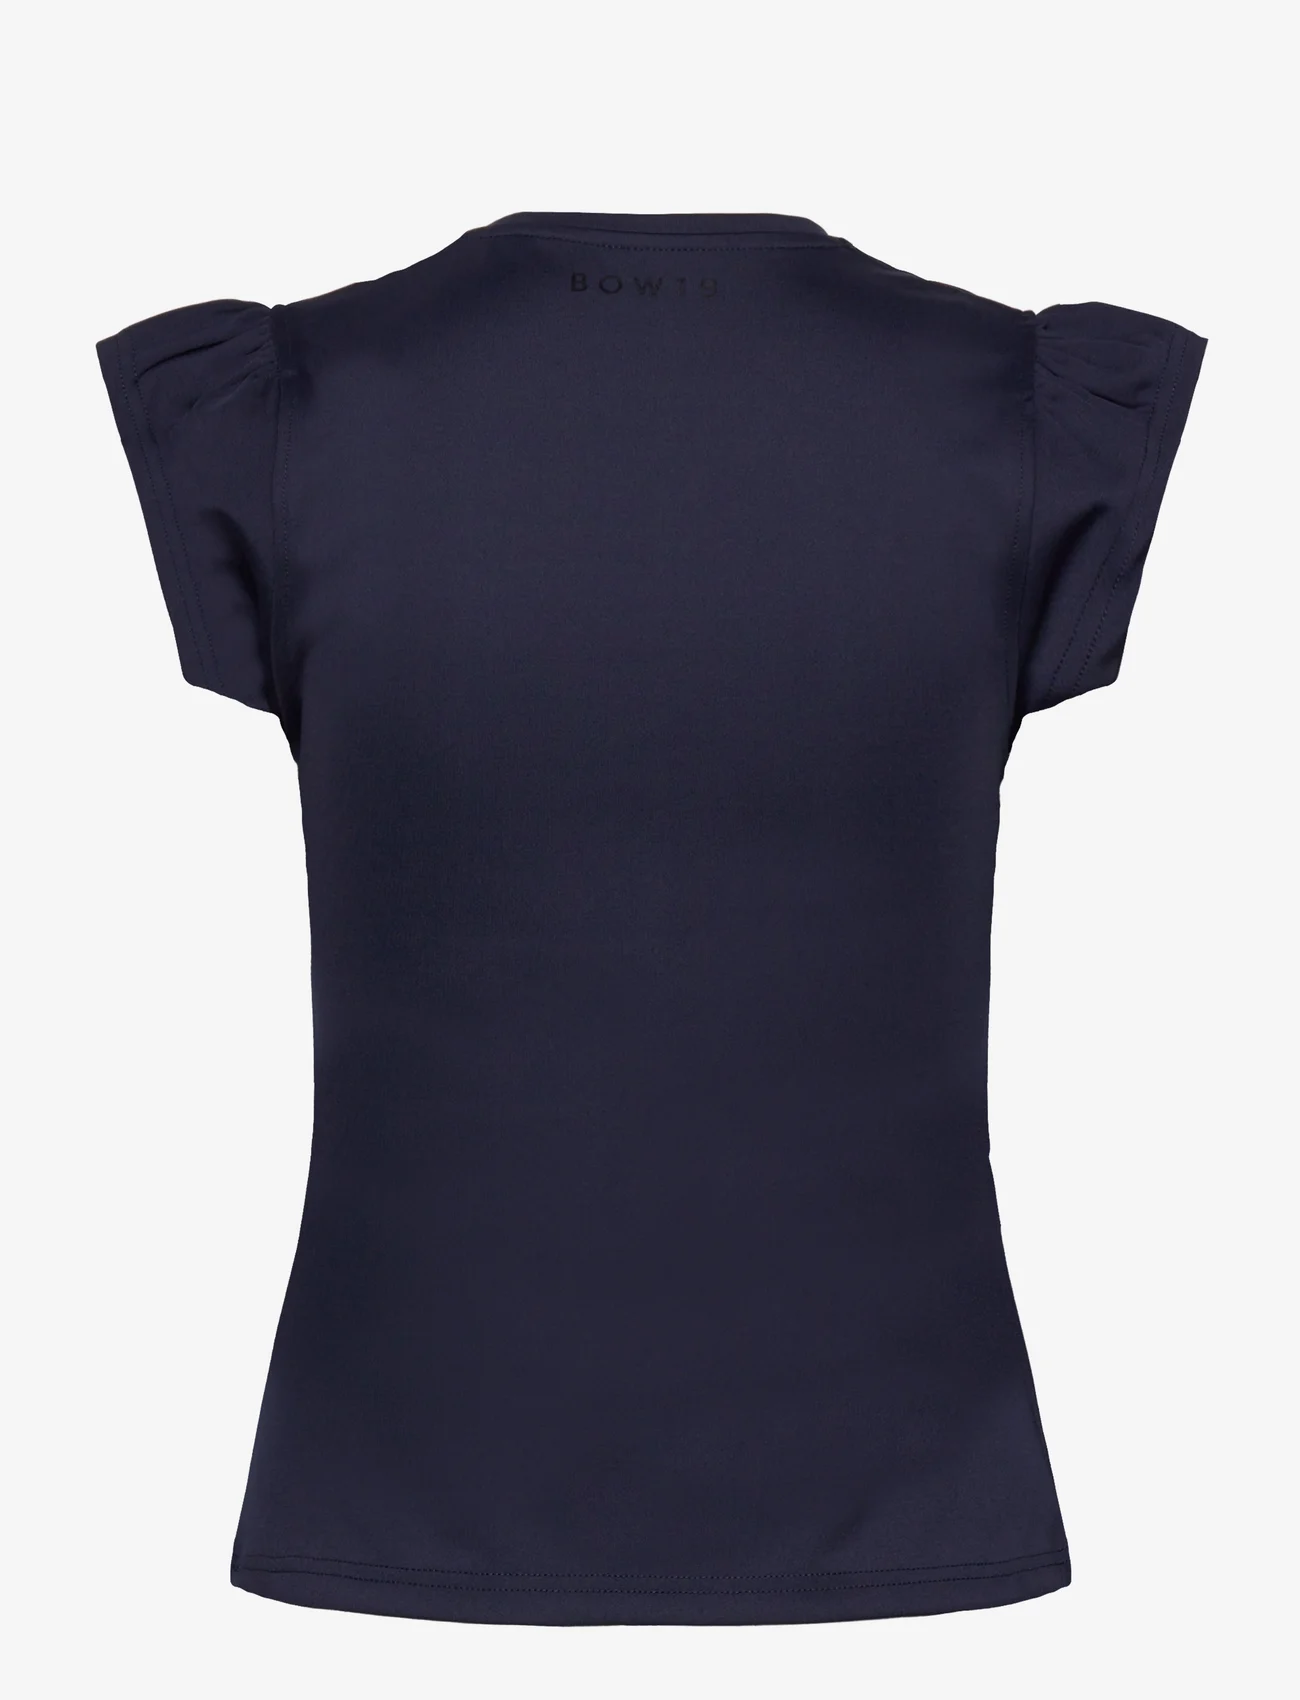 BOW19 - Lily tee - linnen - navy - 1